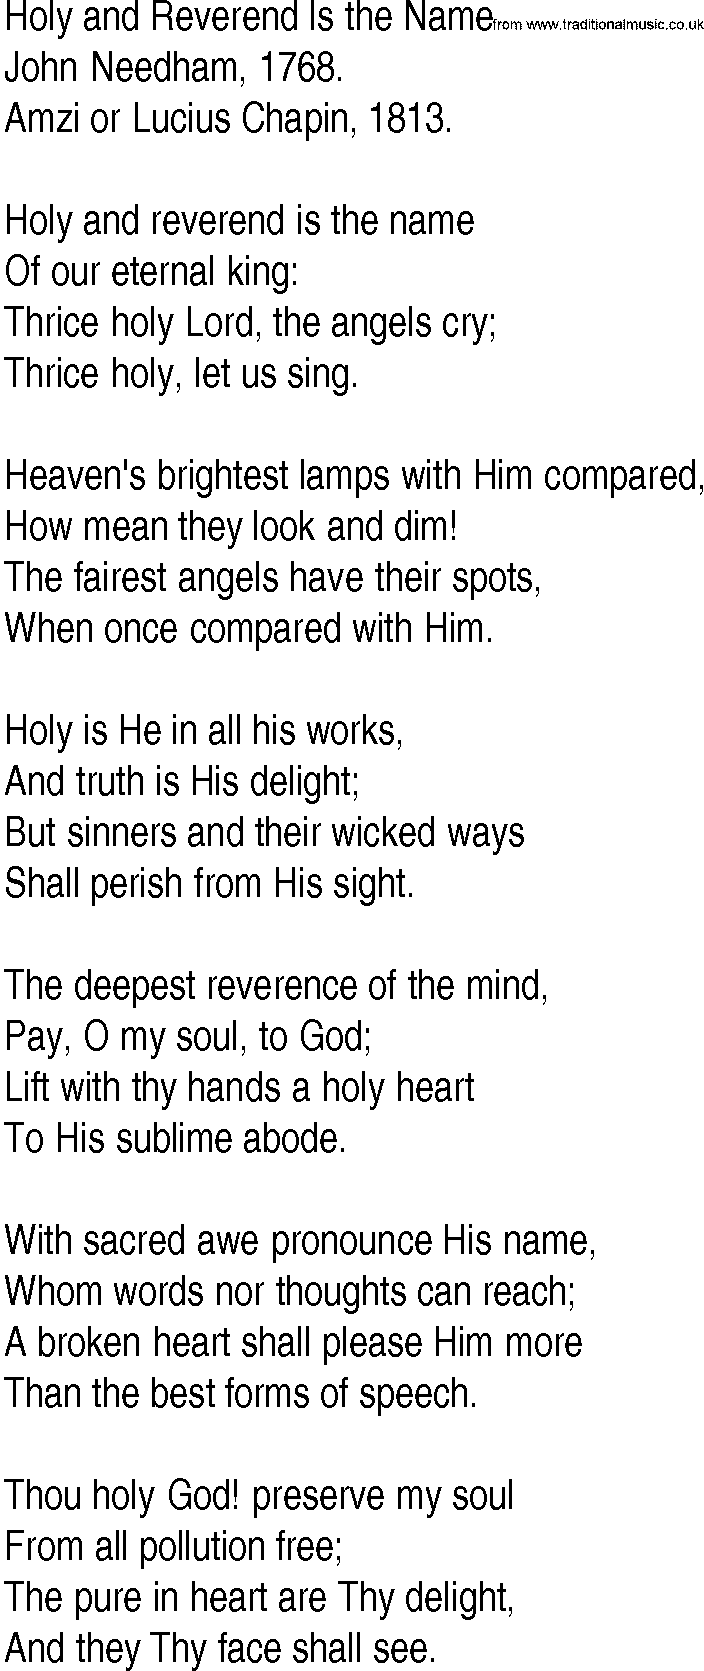 Hymn and Gospel Song: Holy and Reverend Is the Name by John Needham lyrics